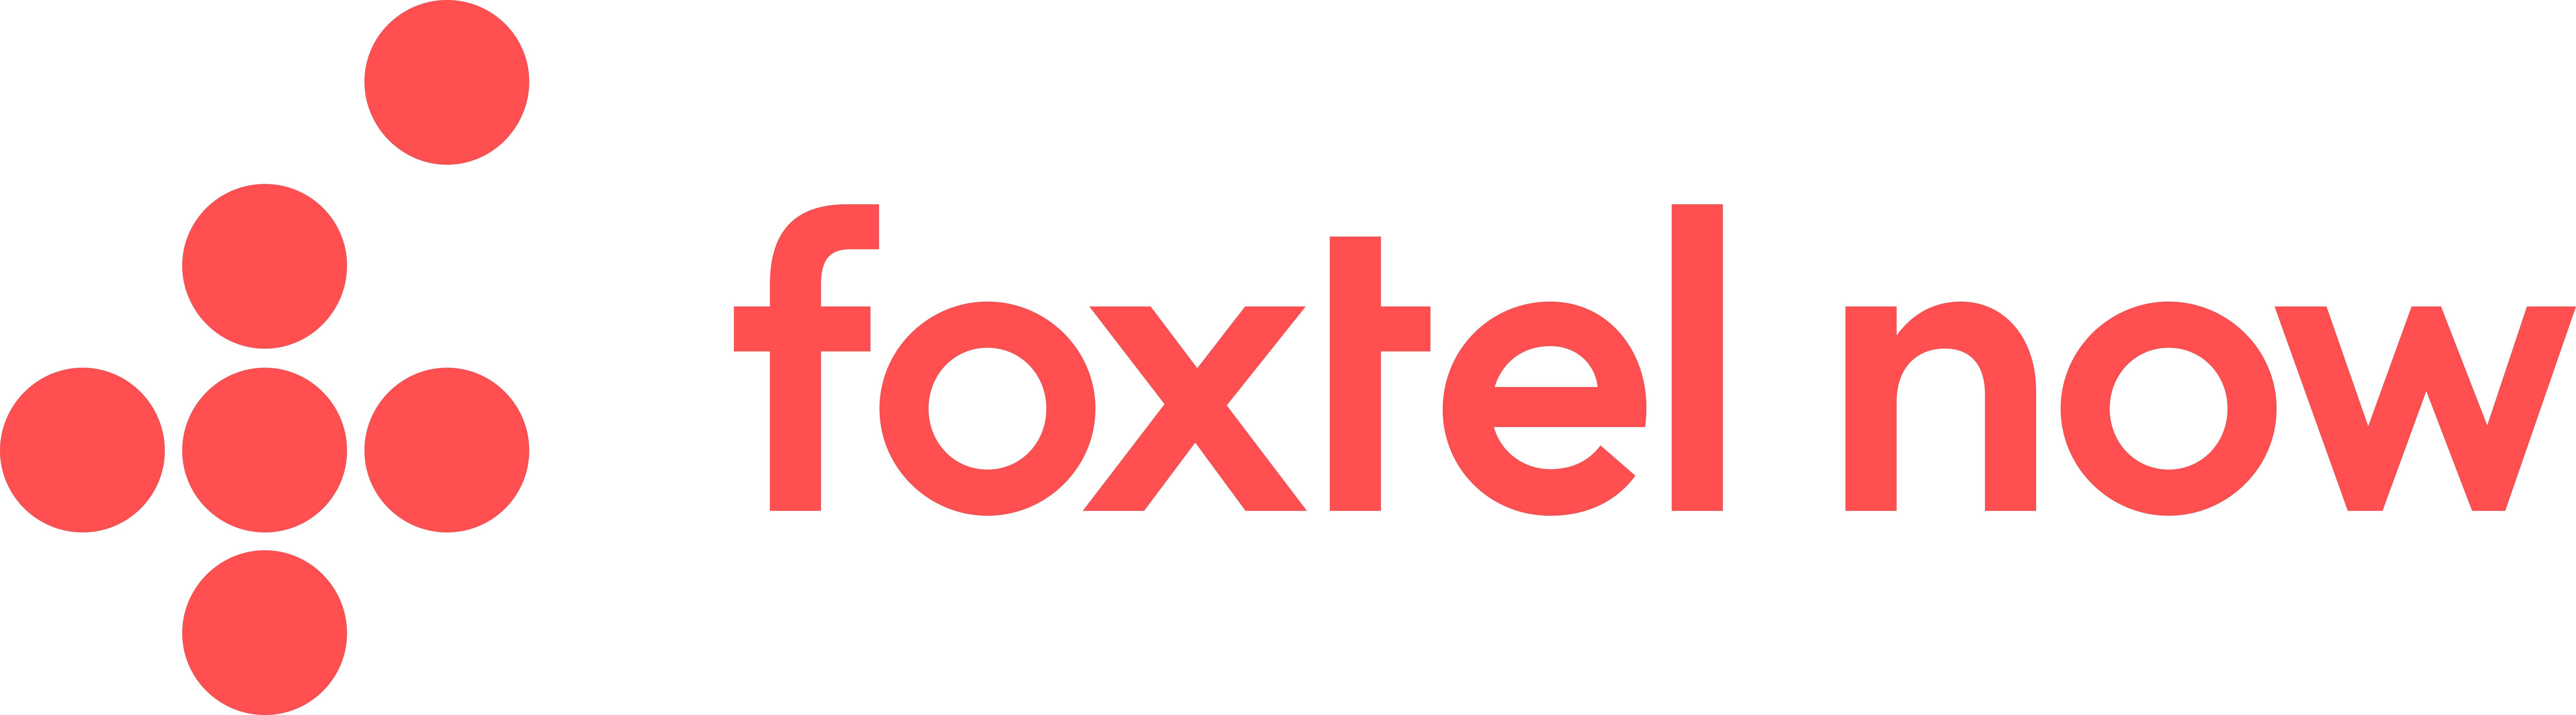 Foxtel Logo - Foxtel rebrands and officially launches Foxtel Now after conceding